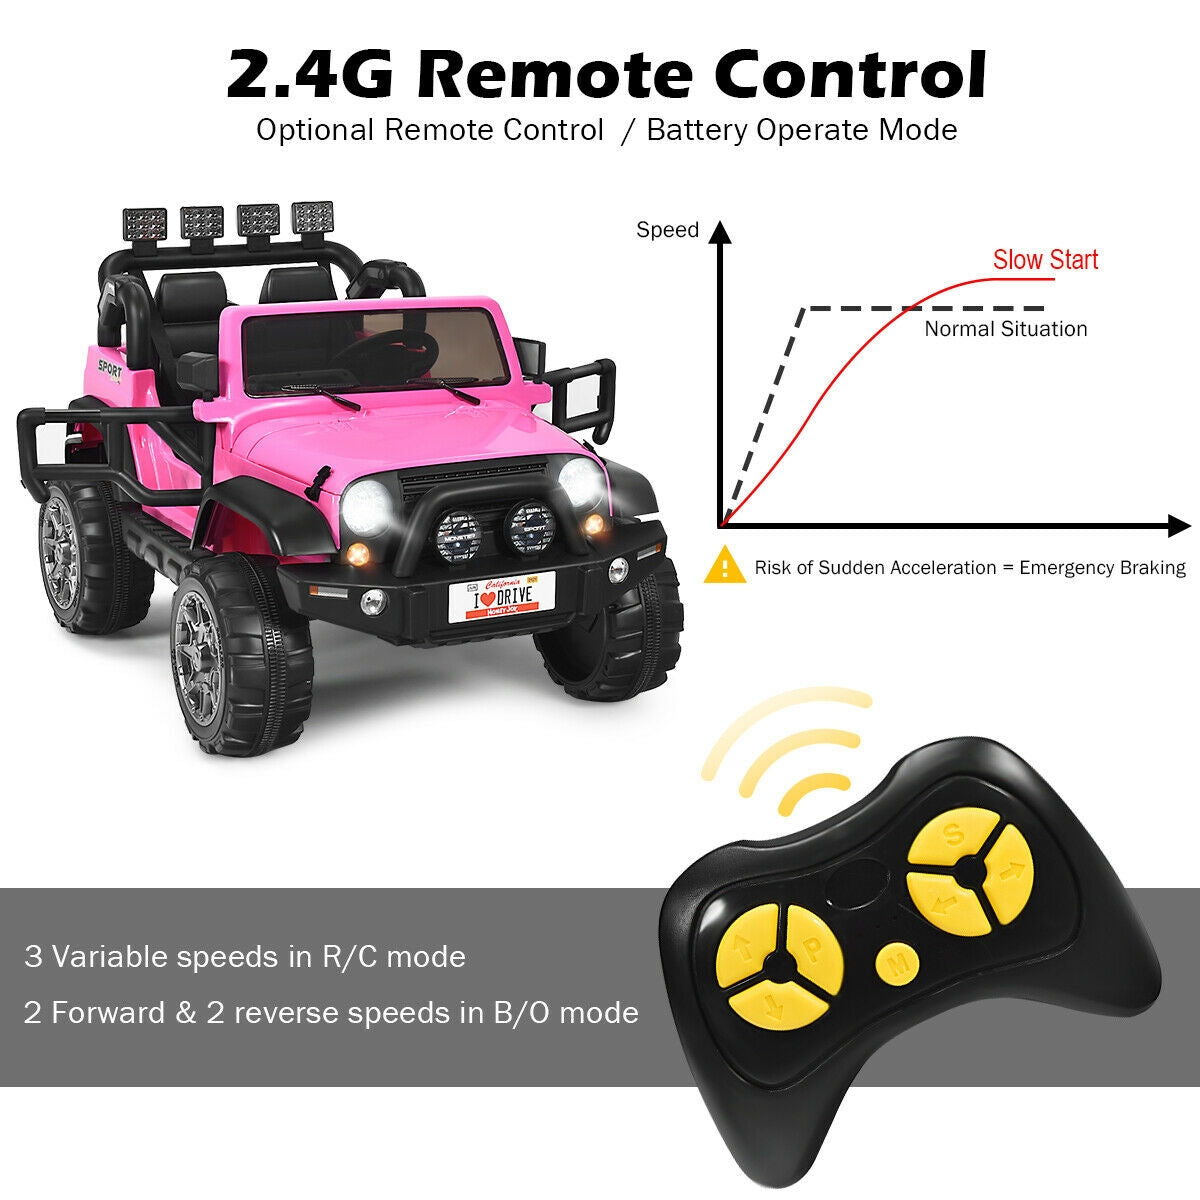 Dual Control Options: Empower your child's driving experience with two control modes. The 2.4G remote control offers three speeds, while the self-driving mode, initiated by the pedal and steering wheel, offers two adjustable velocities. The remote control takes precedence over self-driving. For added convenience, a handle under the car allows for easy transportation.